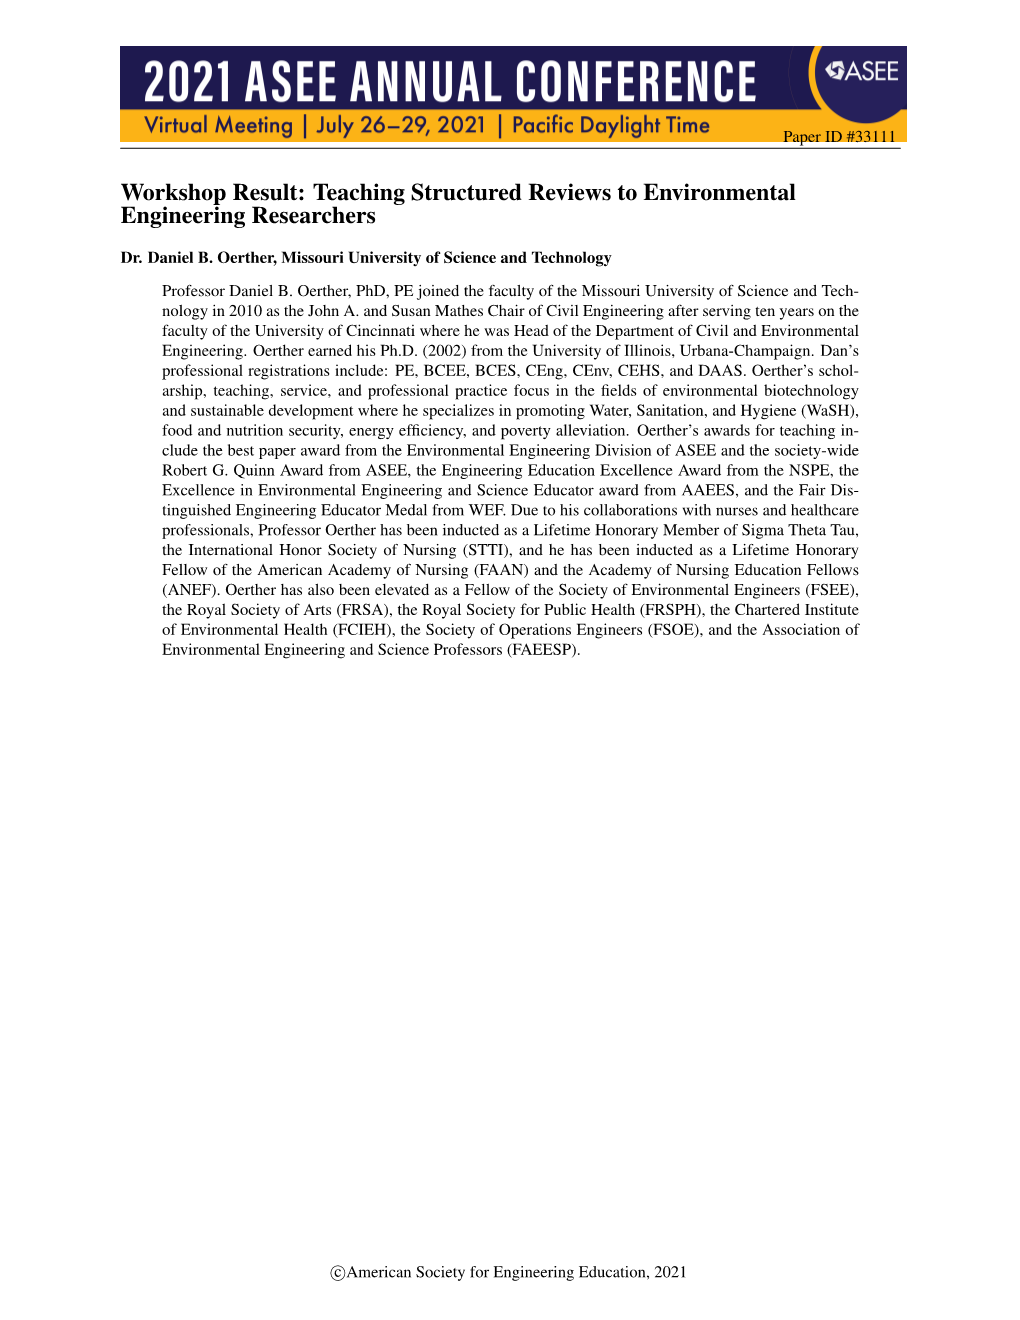 Workshop Result: Teaching Structured Reviews to Environmental Engineering Researchers